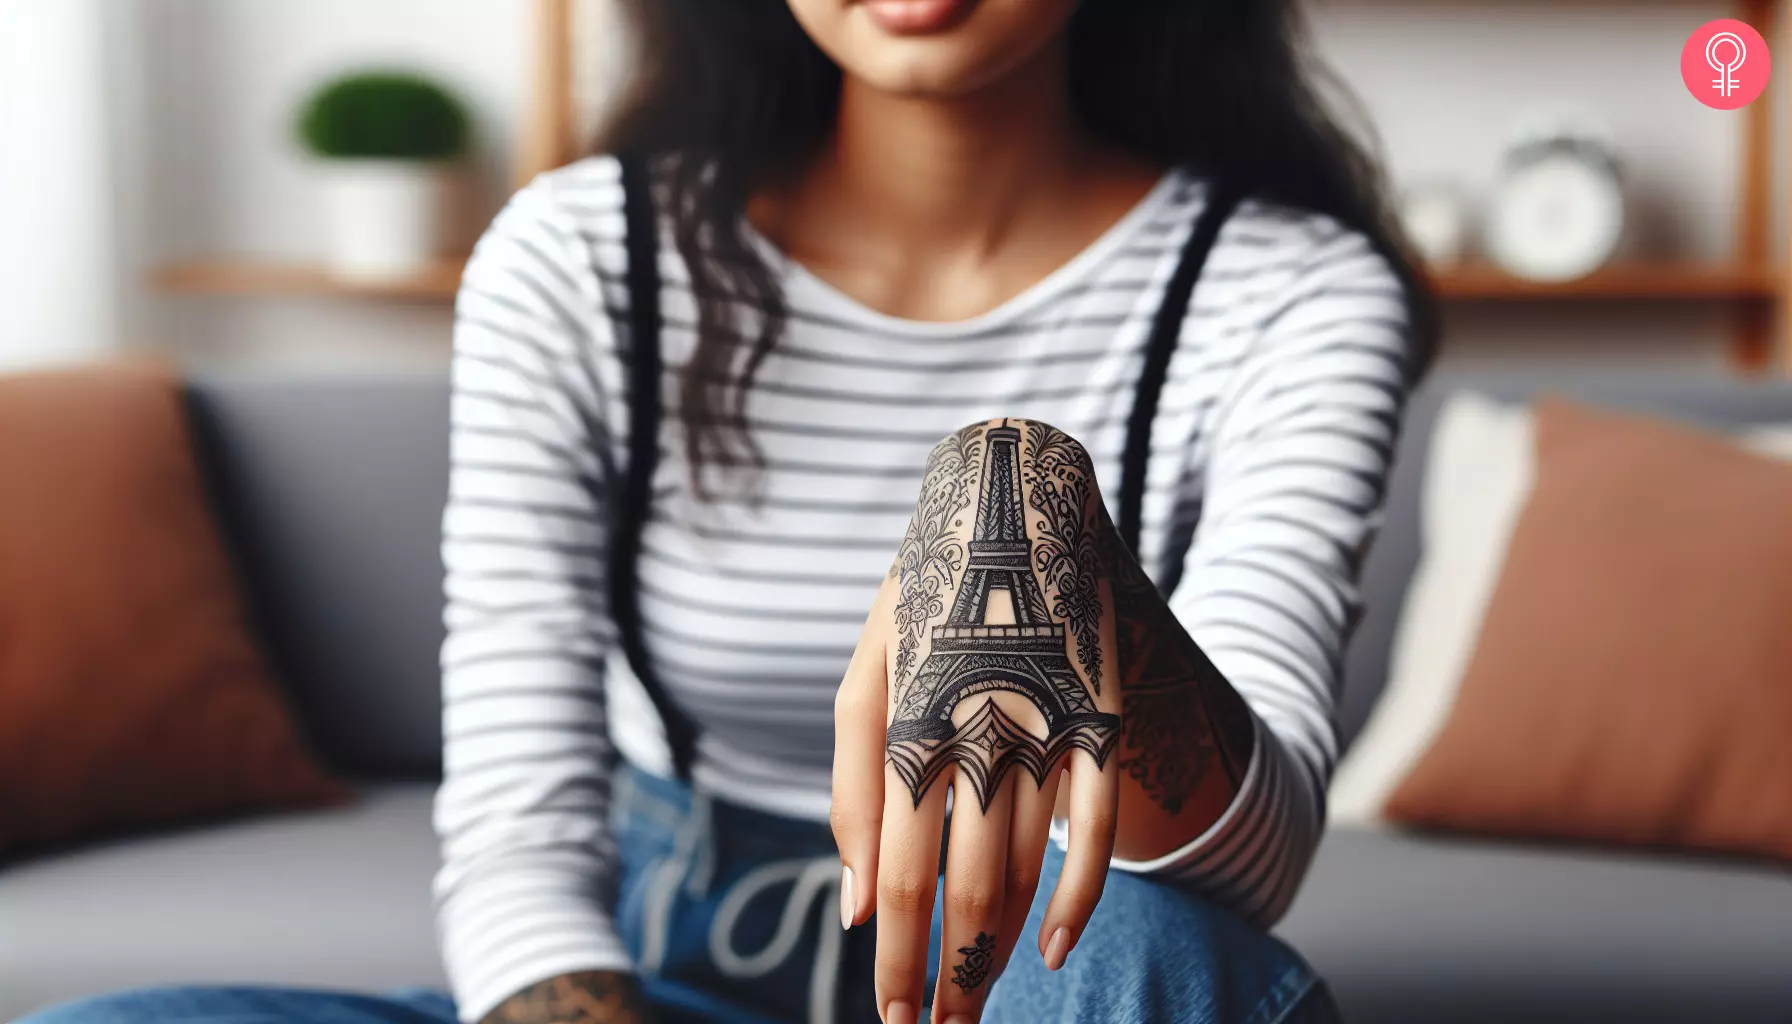 A woman with an Eiffel Tower tattoo on her hand